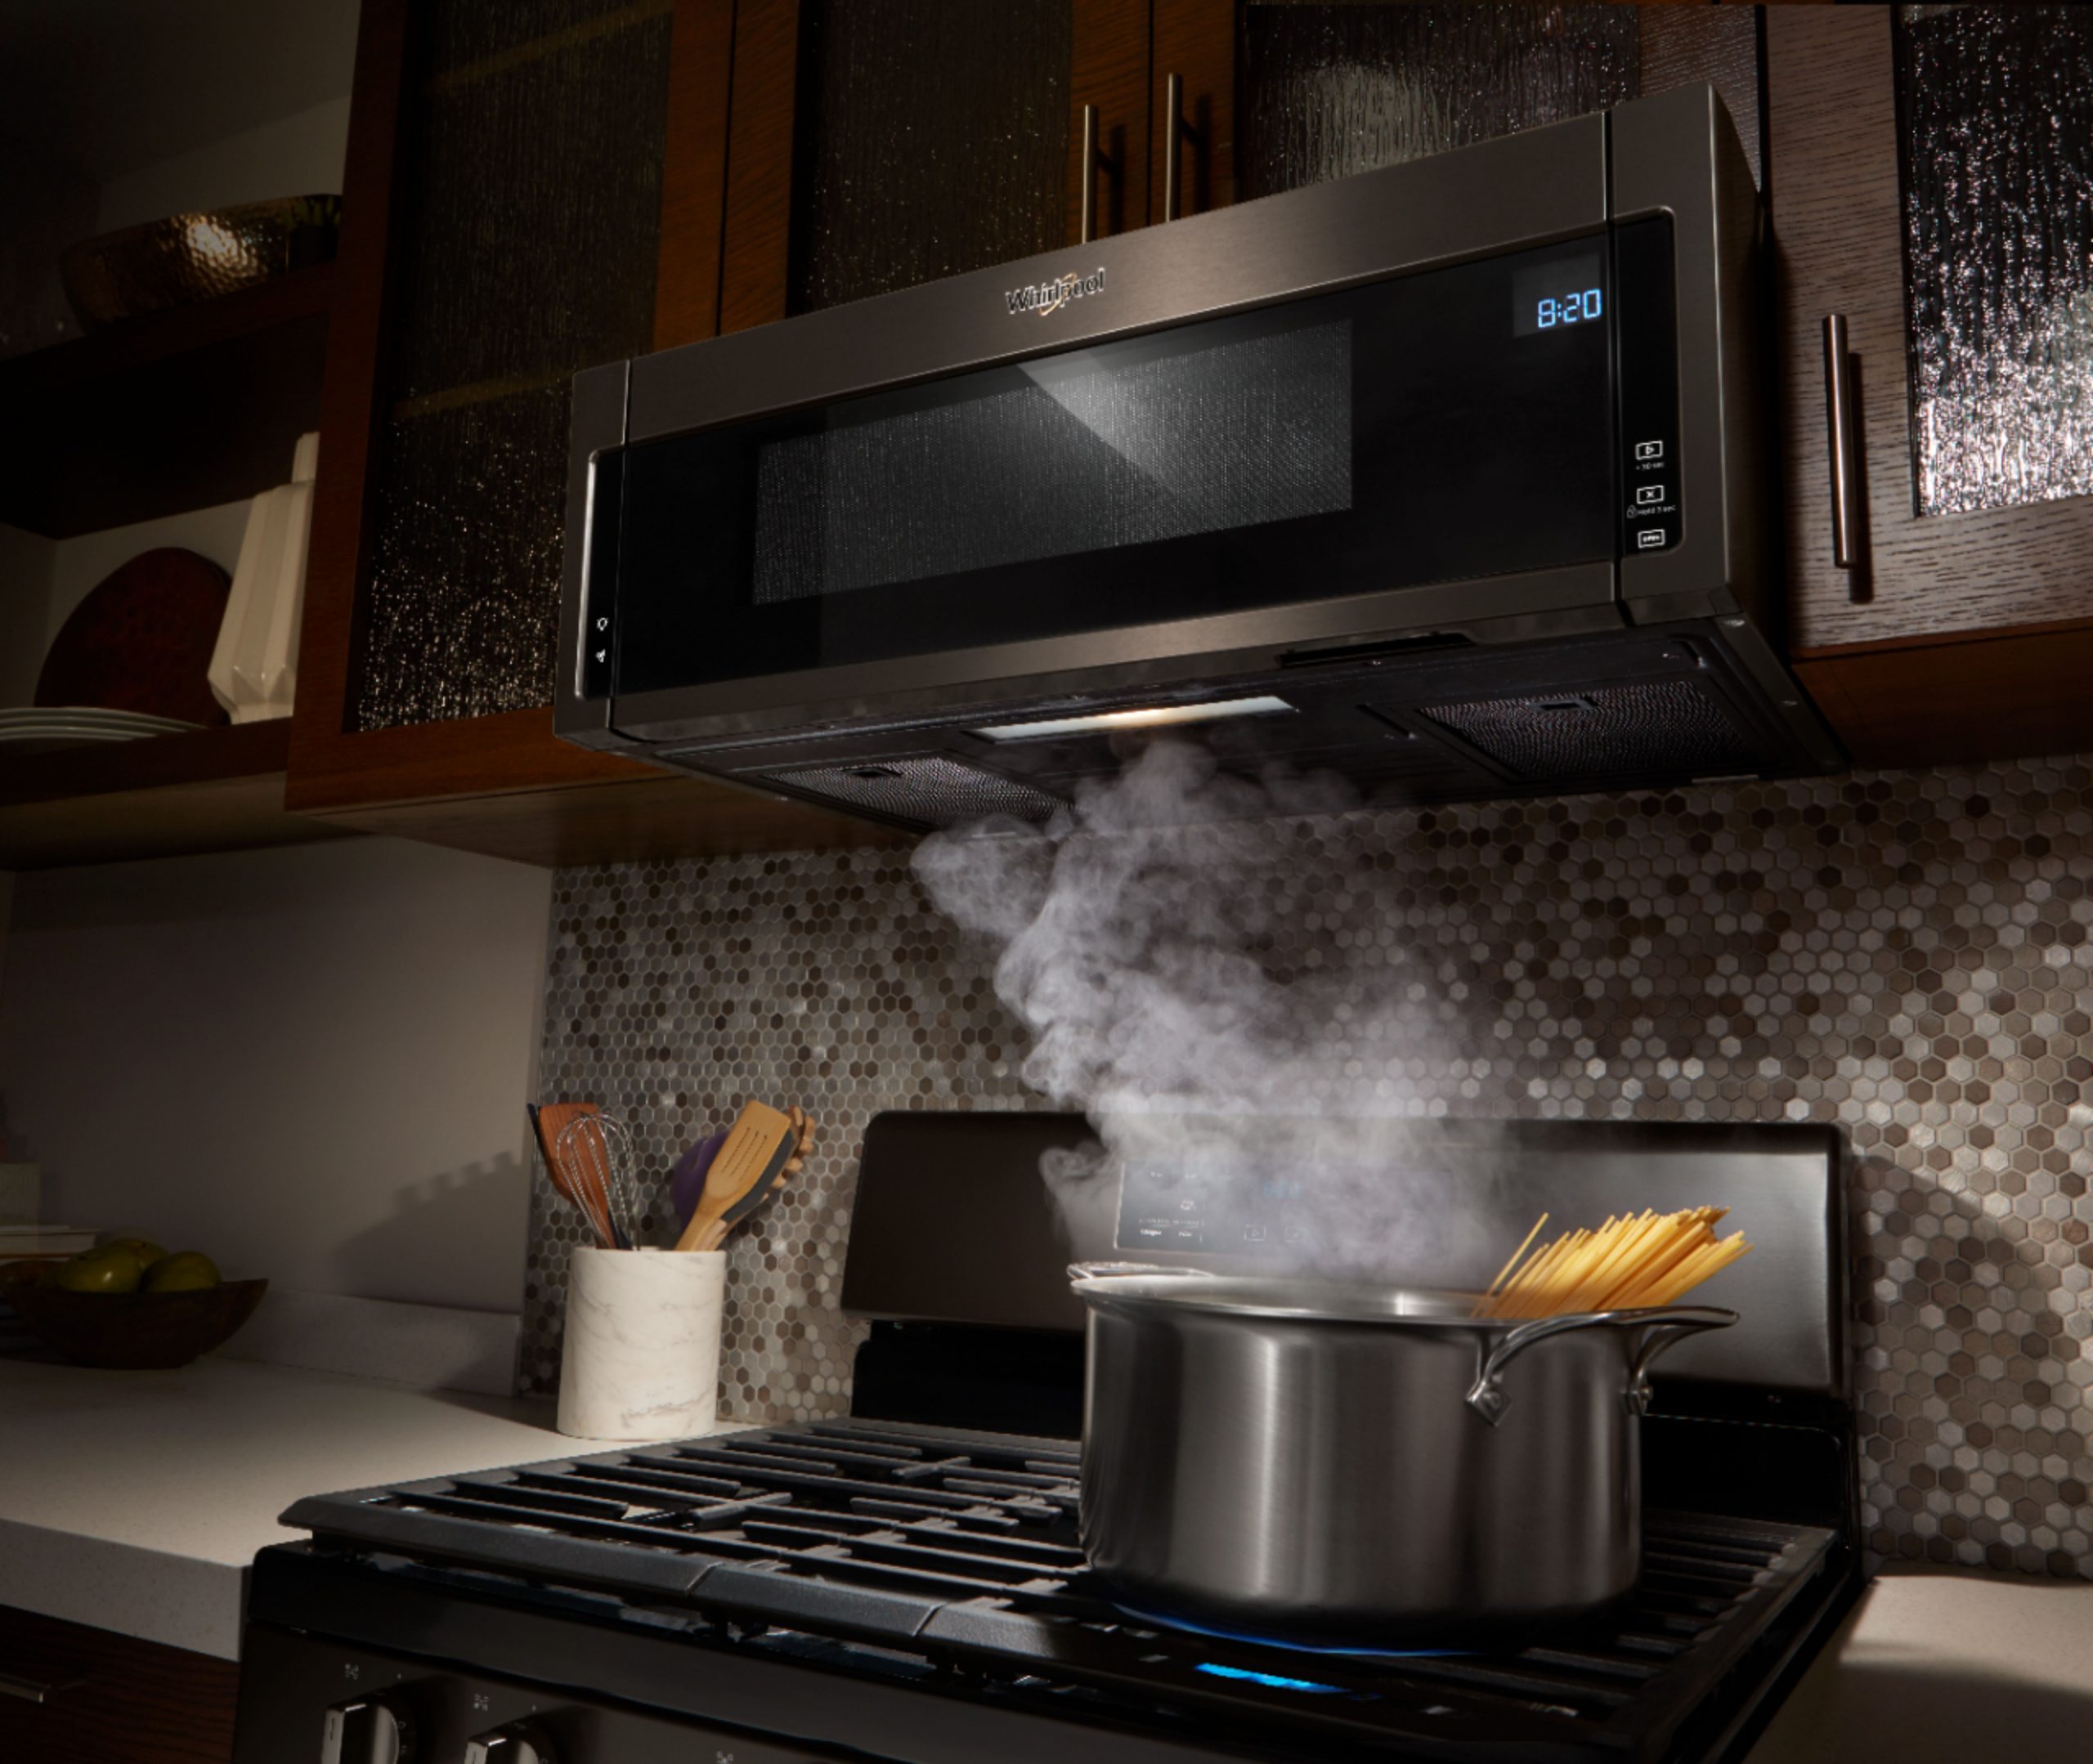 Whirlpool 11 Cu Ft Low Profile Over The Range Microwave Hood Combination Black Stainless Steel in dimensions 6868 X 5789